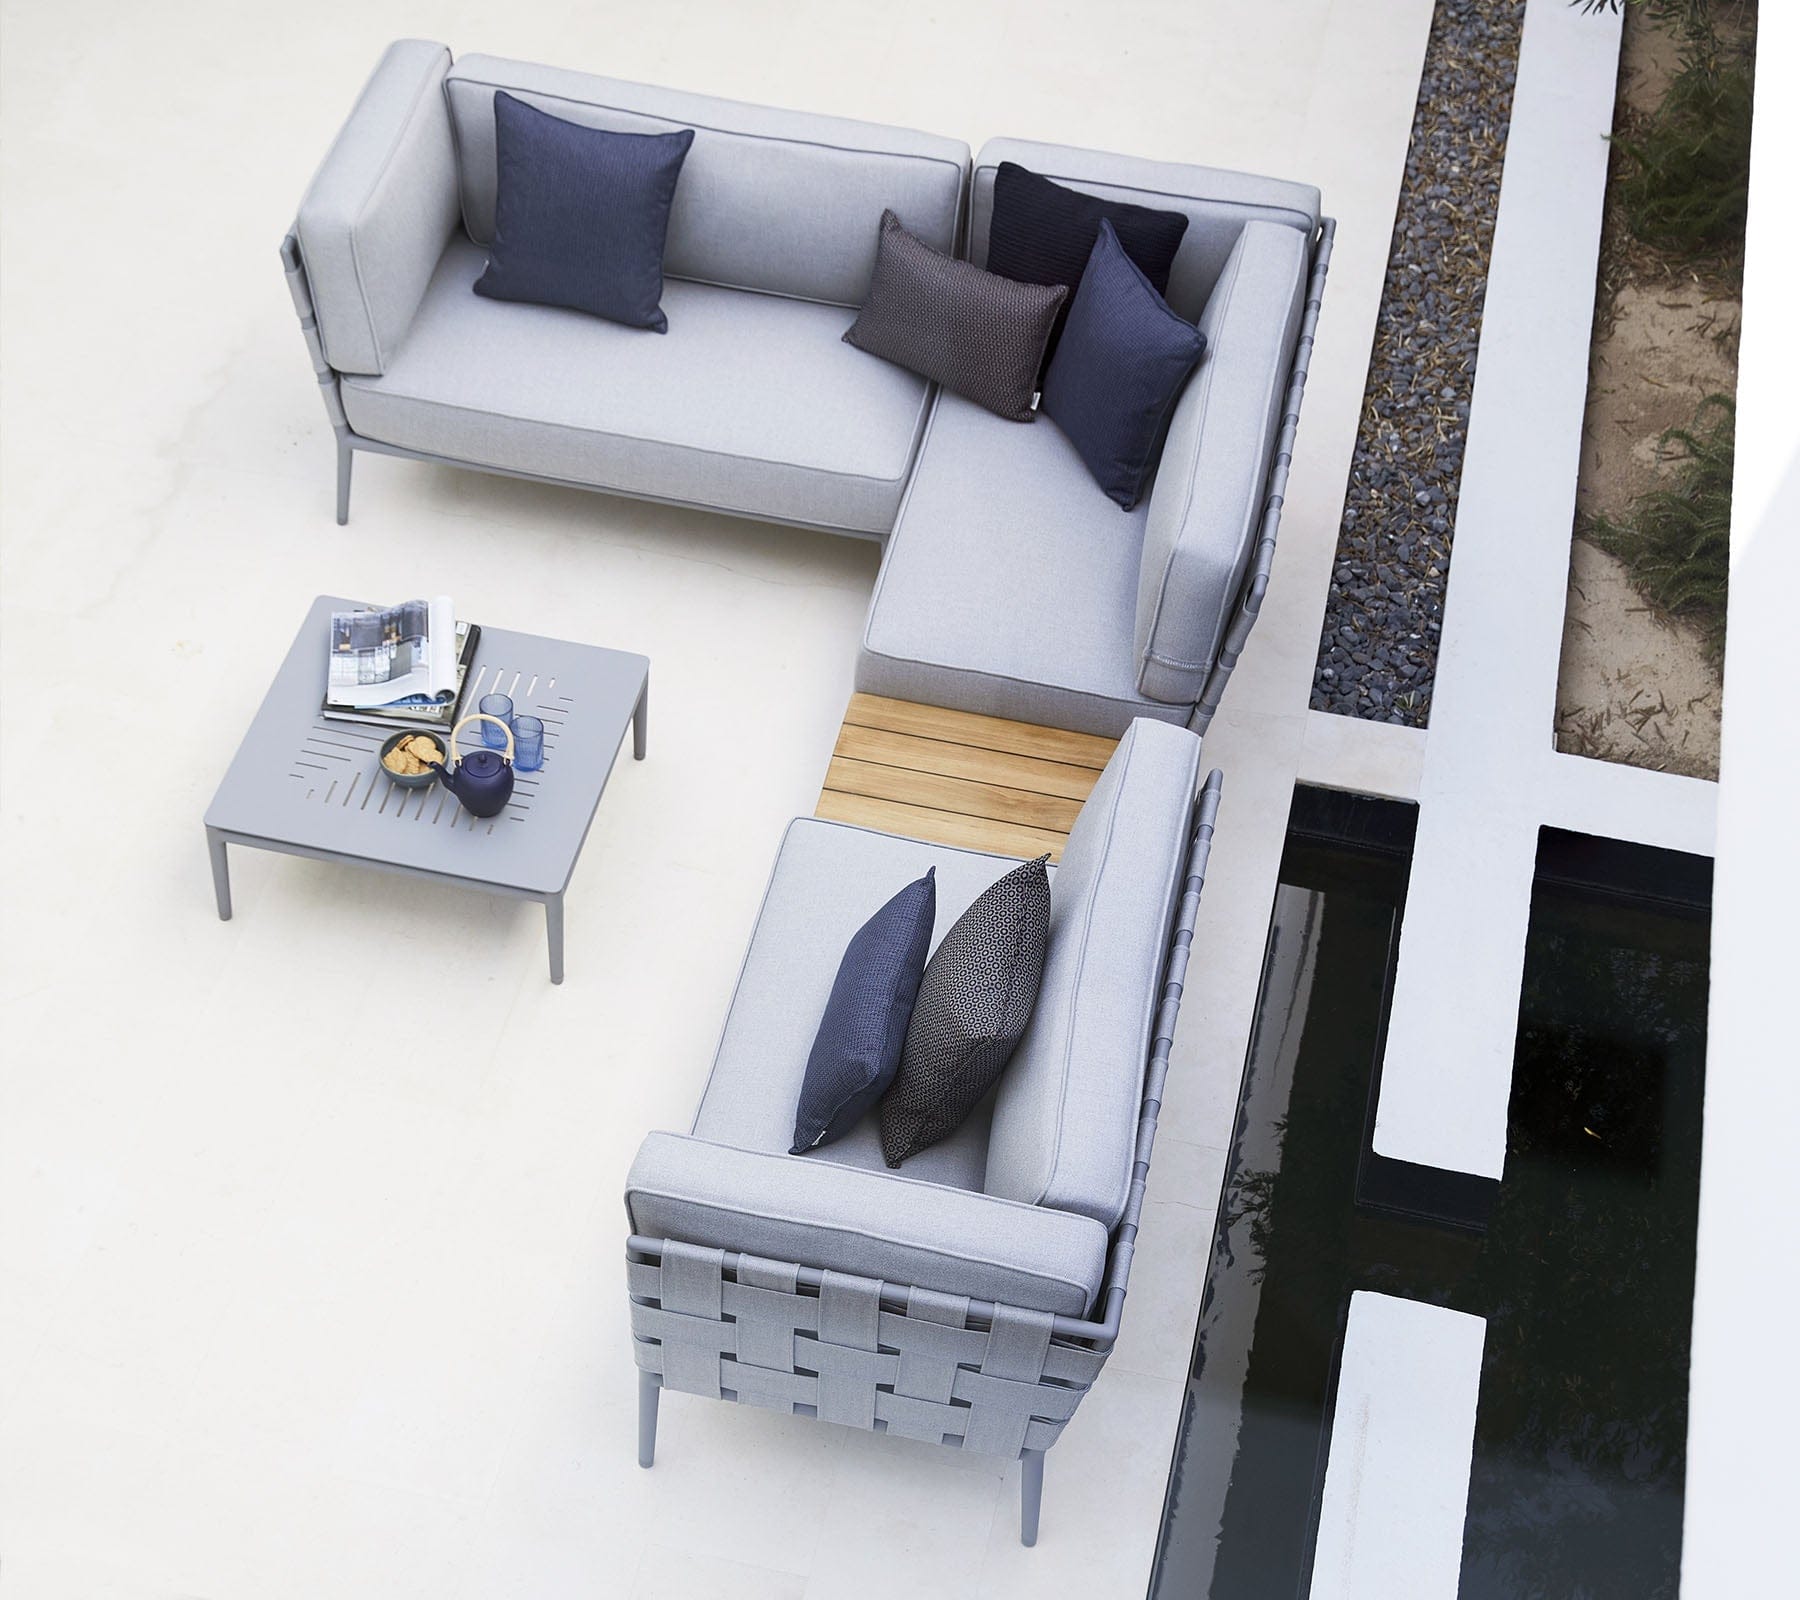 Boxhill's Conic Lounge Combo B Light Grey lifestyle image with Conic Coffee Table top view